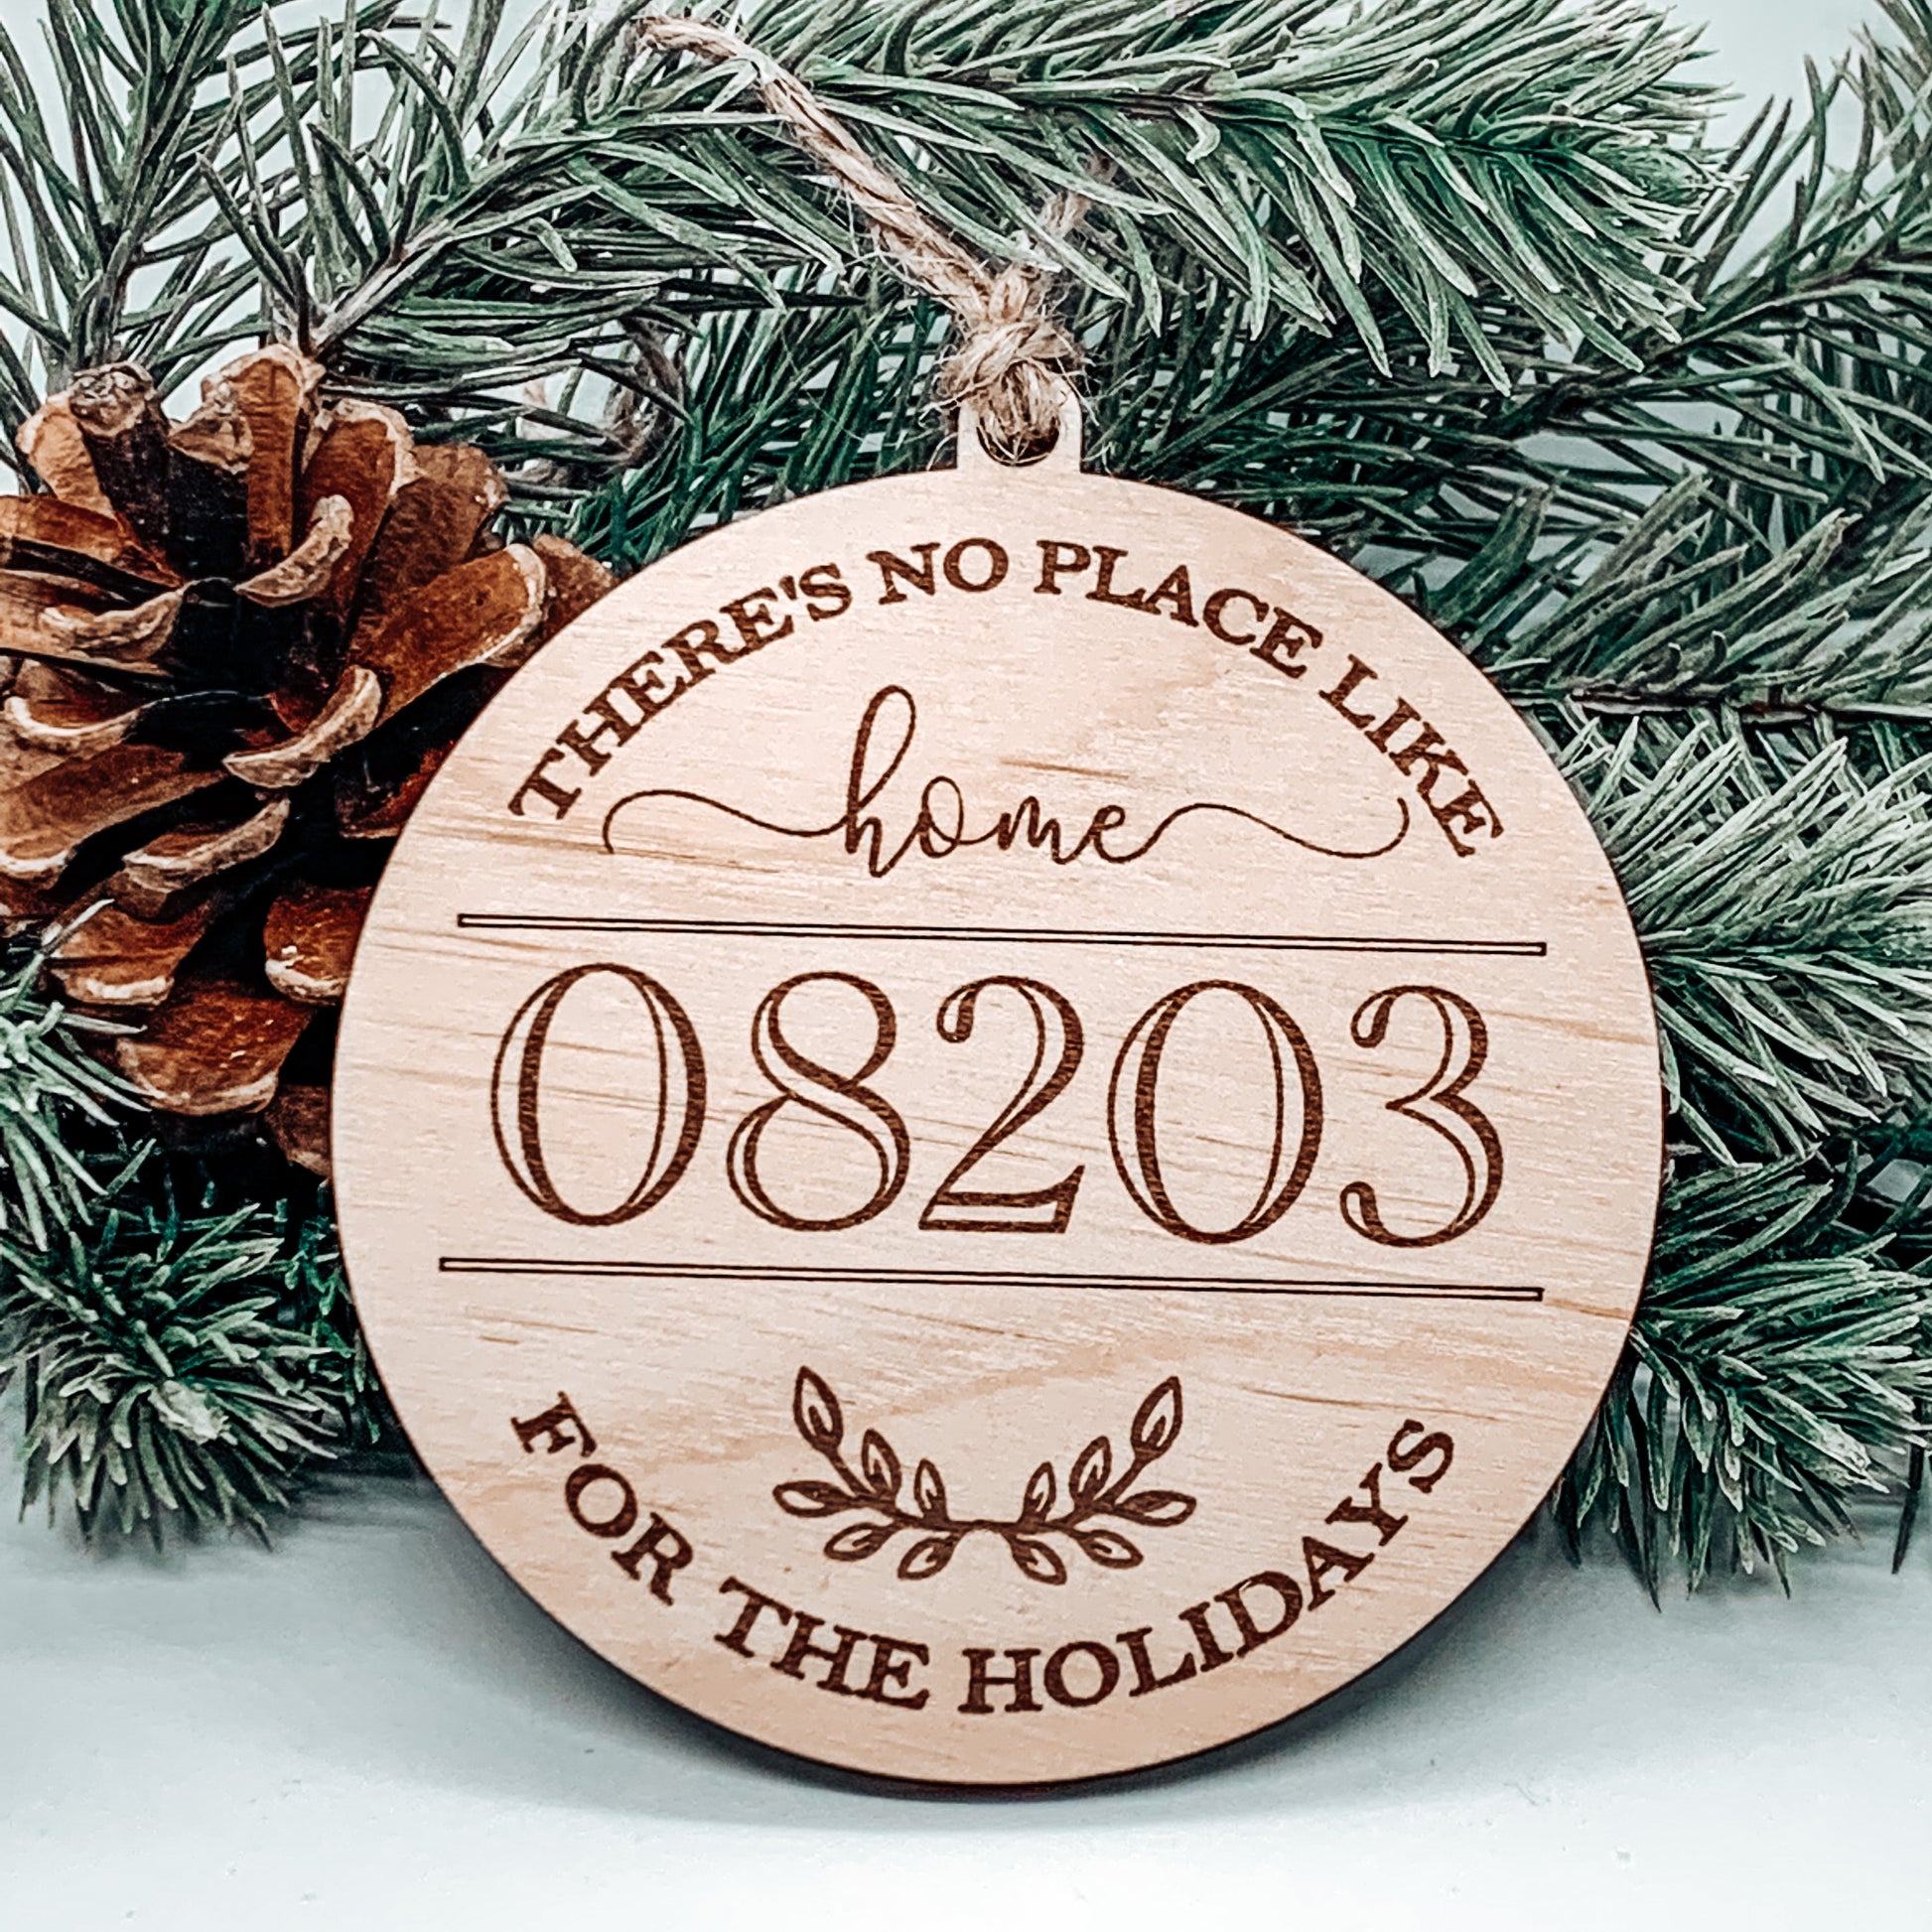 There's No Place Like Home Ornament - Sea Pine Designs